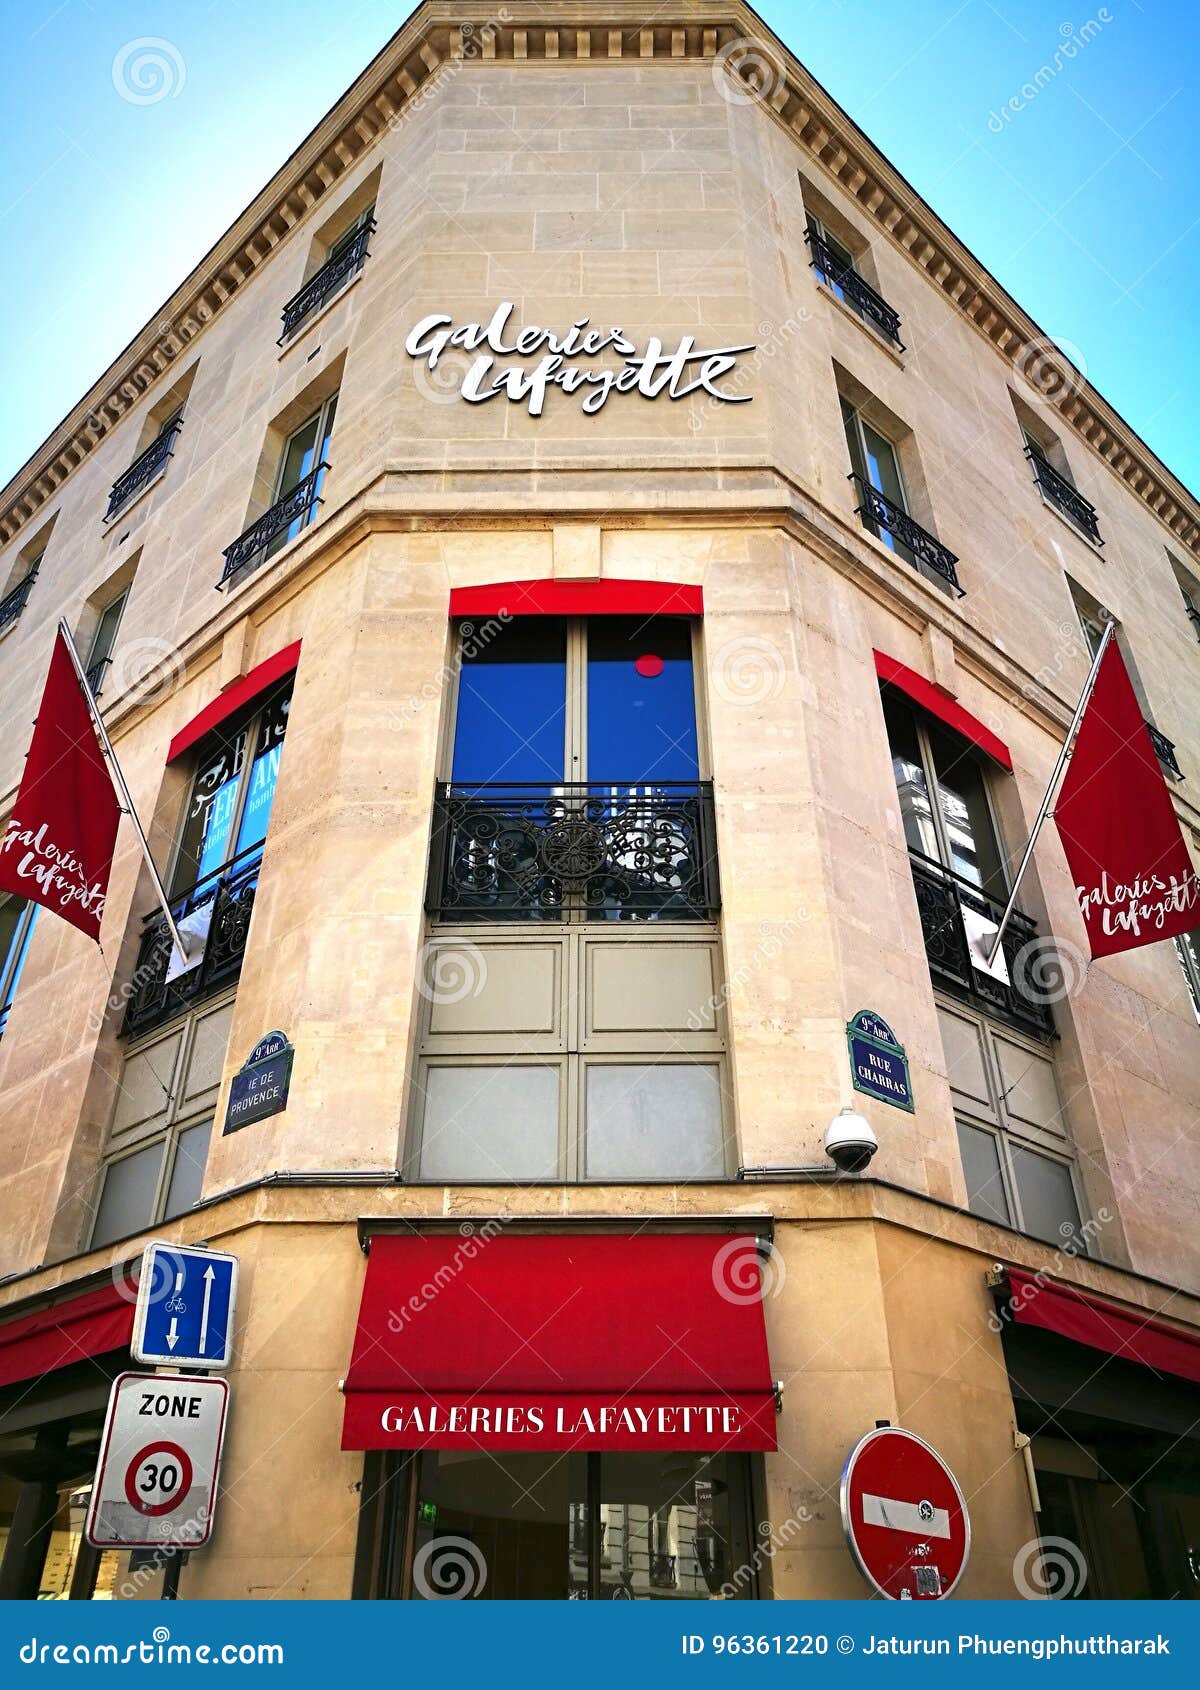 The Galeries Lafayette is an Popular French Department Store Chain ...